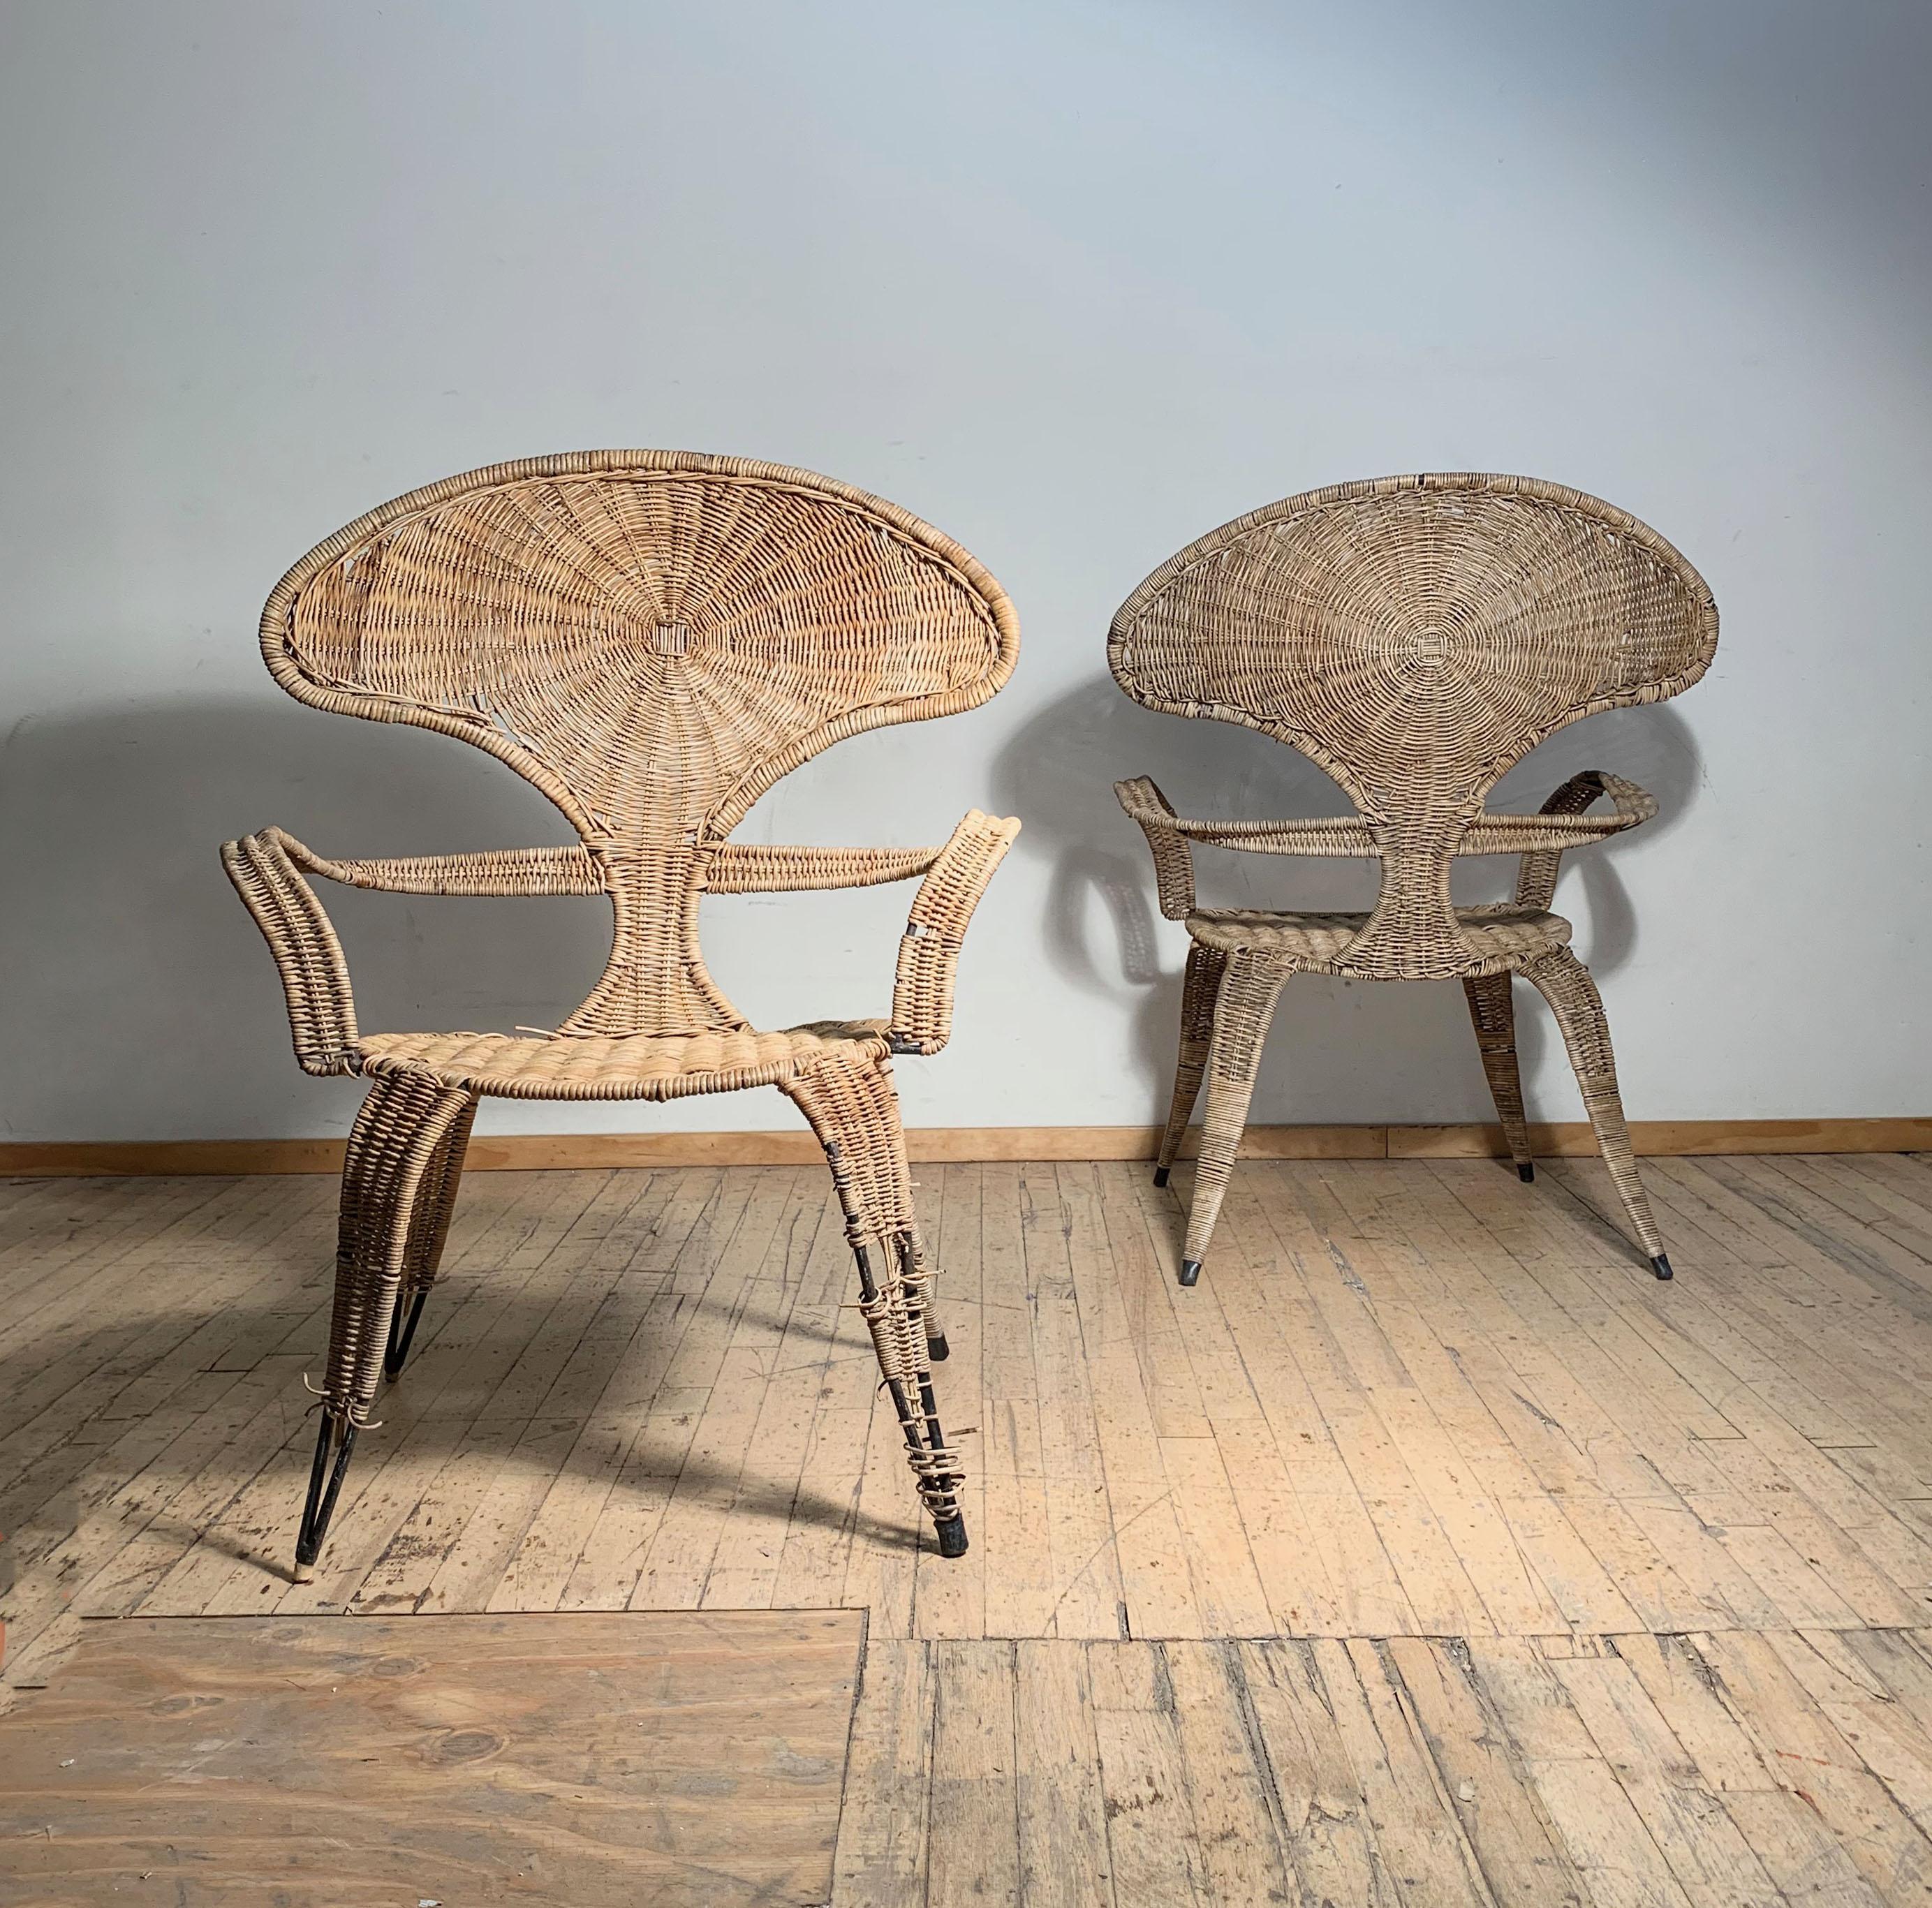 Wicker Tropi-Cal Danny Ho Fong and Miller Fong Garden Patio Pair of Chairs For Sale